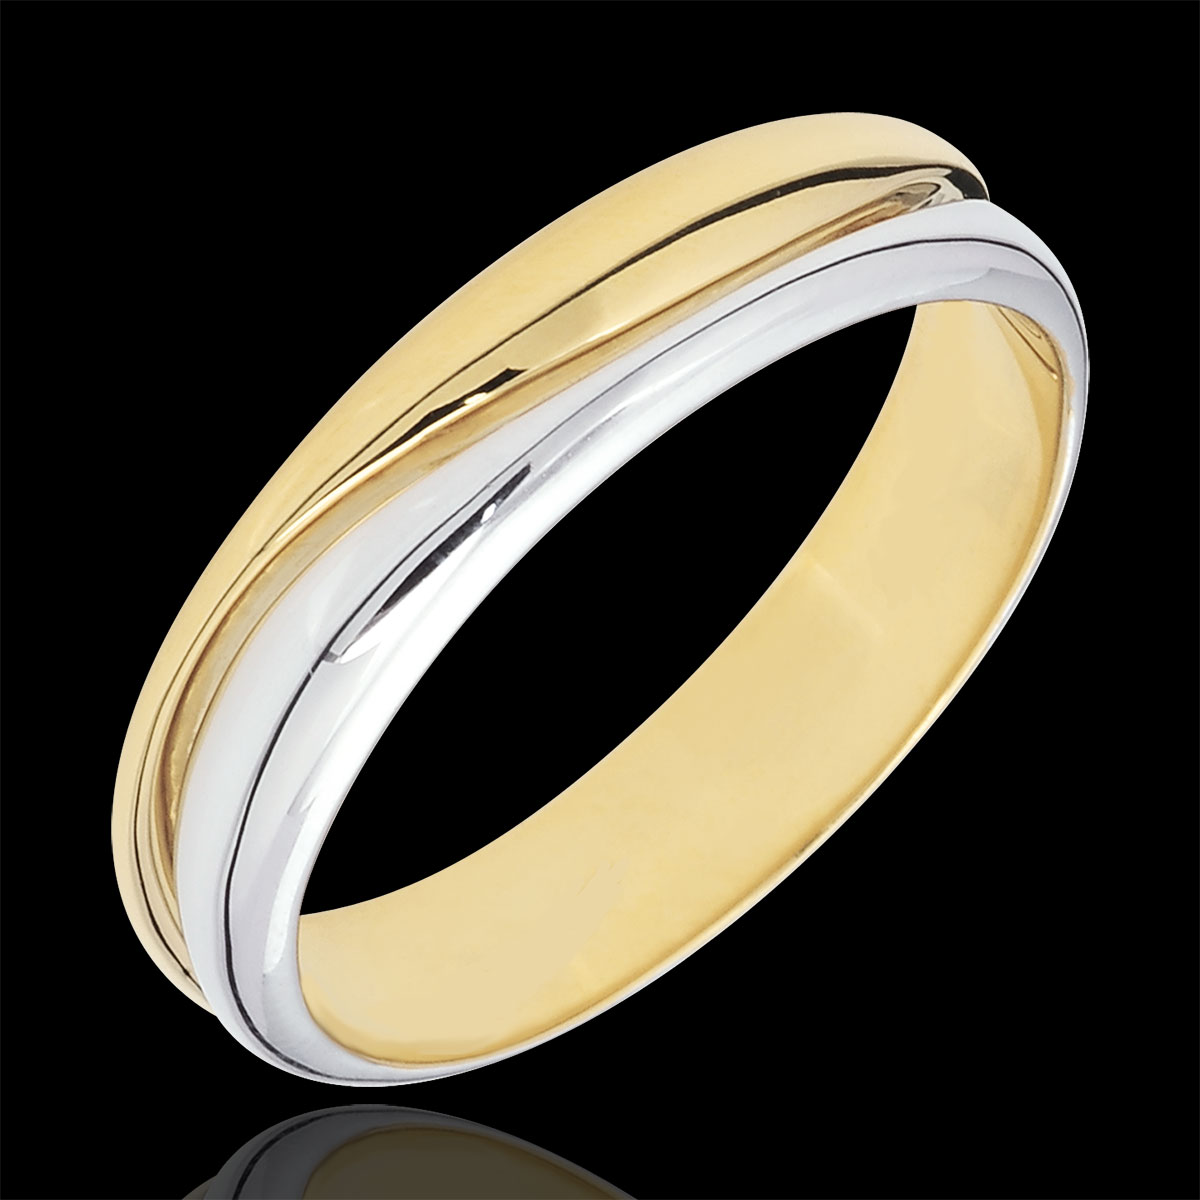 Ring Love White Gold And Yellow Gold Wedding Ring For Men 0 022 Carat Diamond 9 Carats  8757210 1 Z 